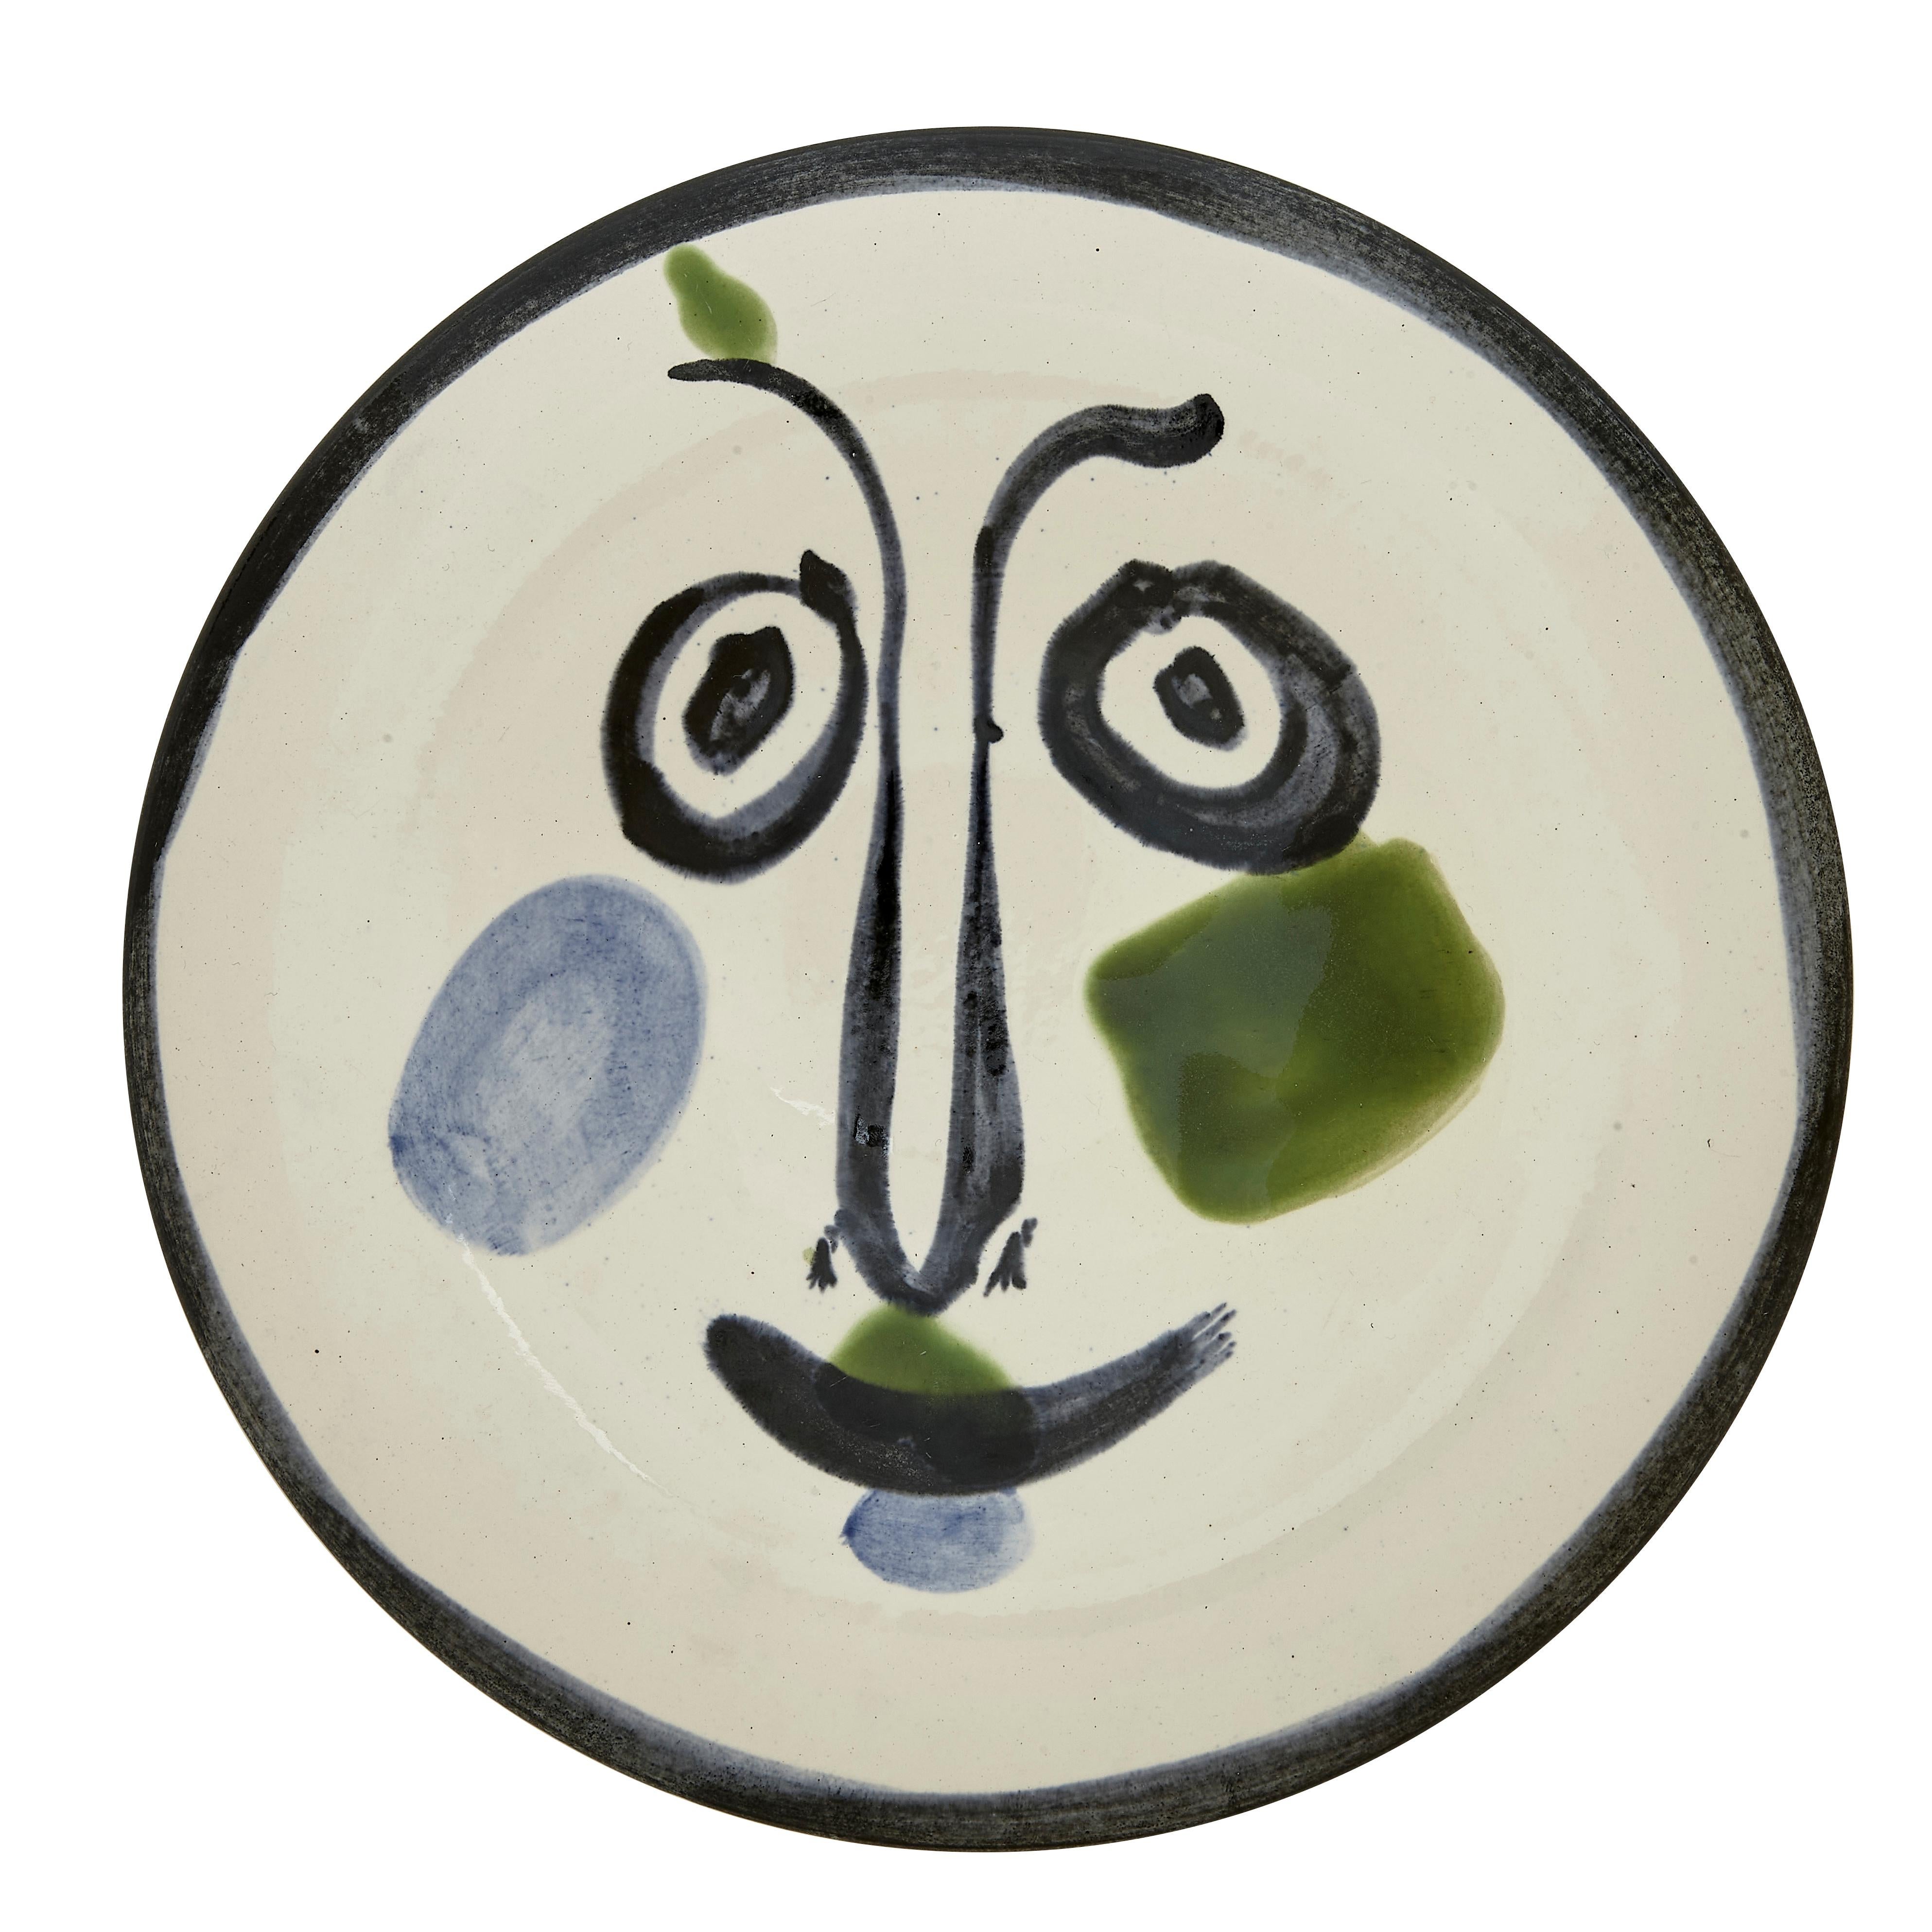 PABLO PICASSO (1881-1973) 
Visage No. 197 (A. R. 494) 

Terre de faïence plate, 1963, numbered 151/500, titled, inscribed 'Edition Picasso' and 'Madoura', glazed and painted